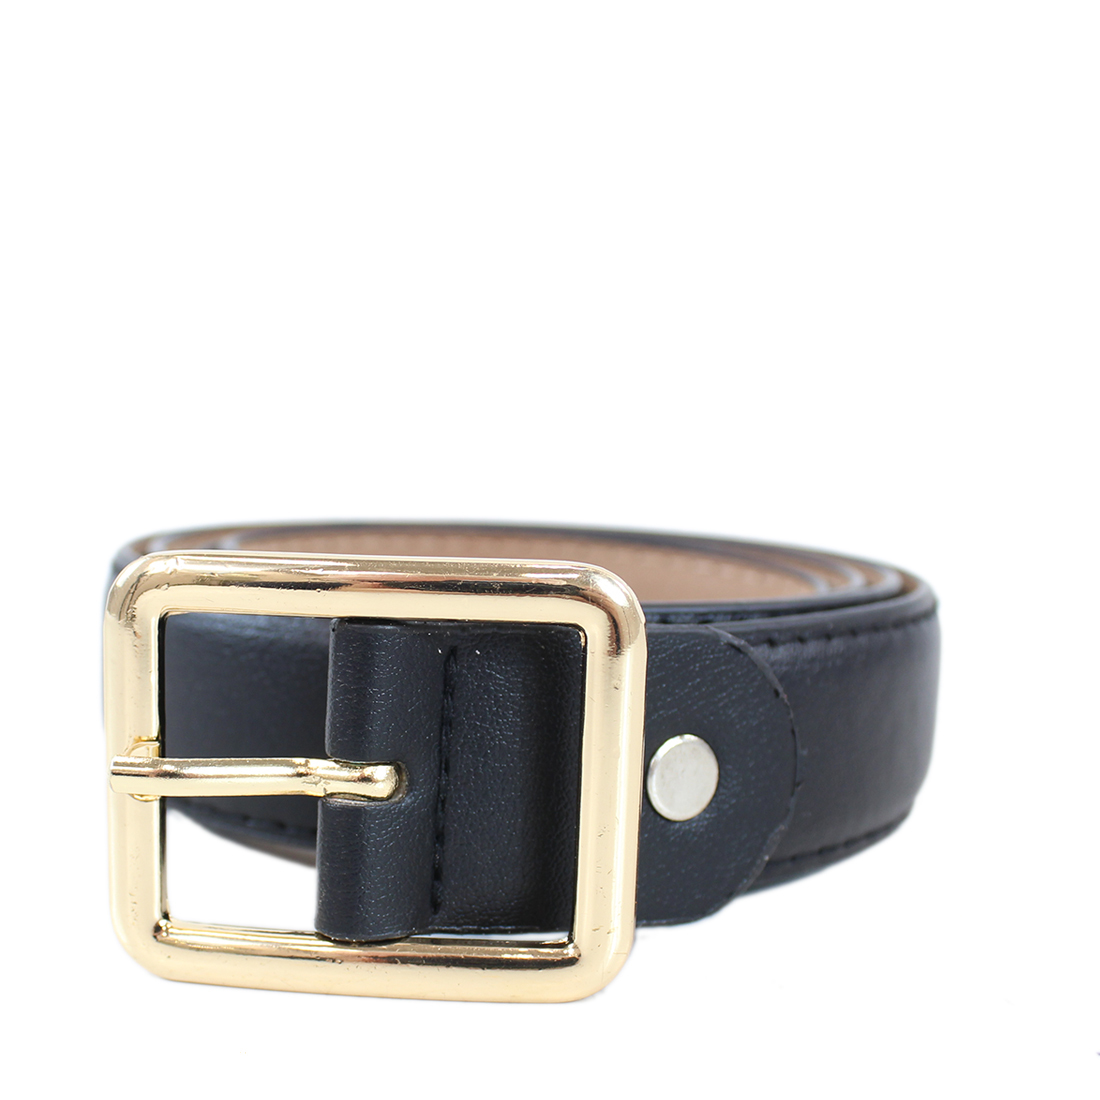 * Plain with gold buckle